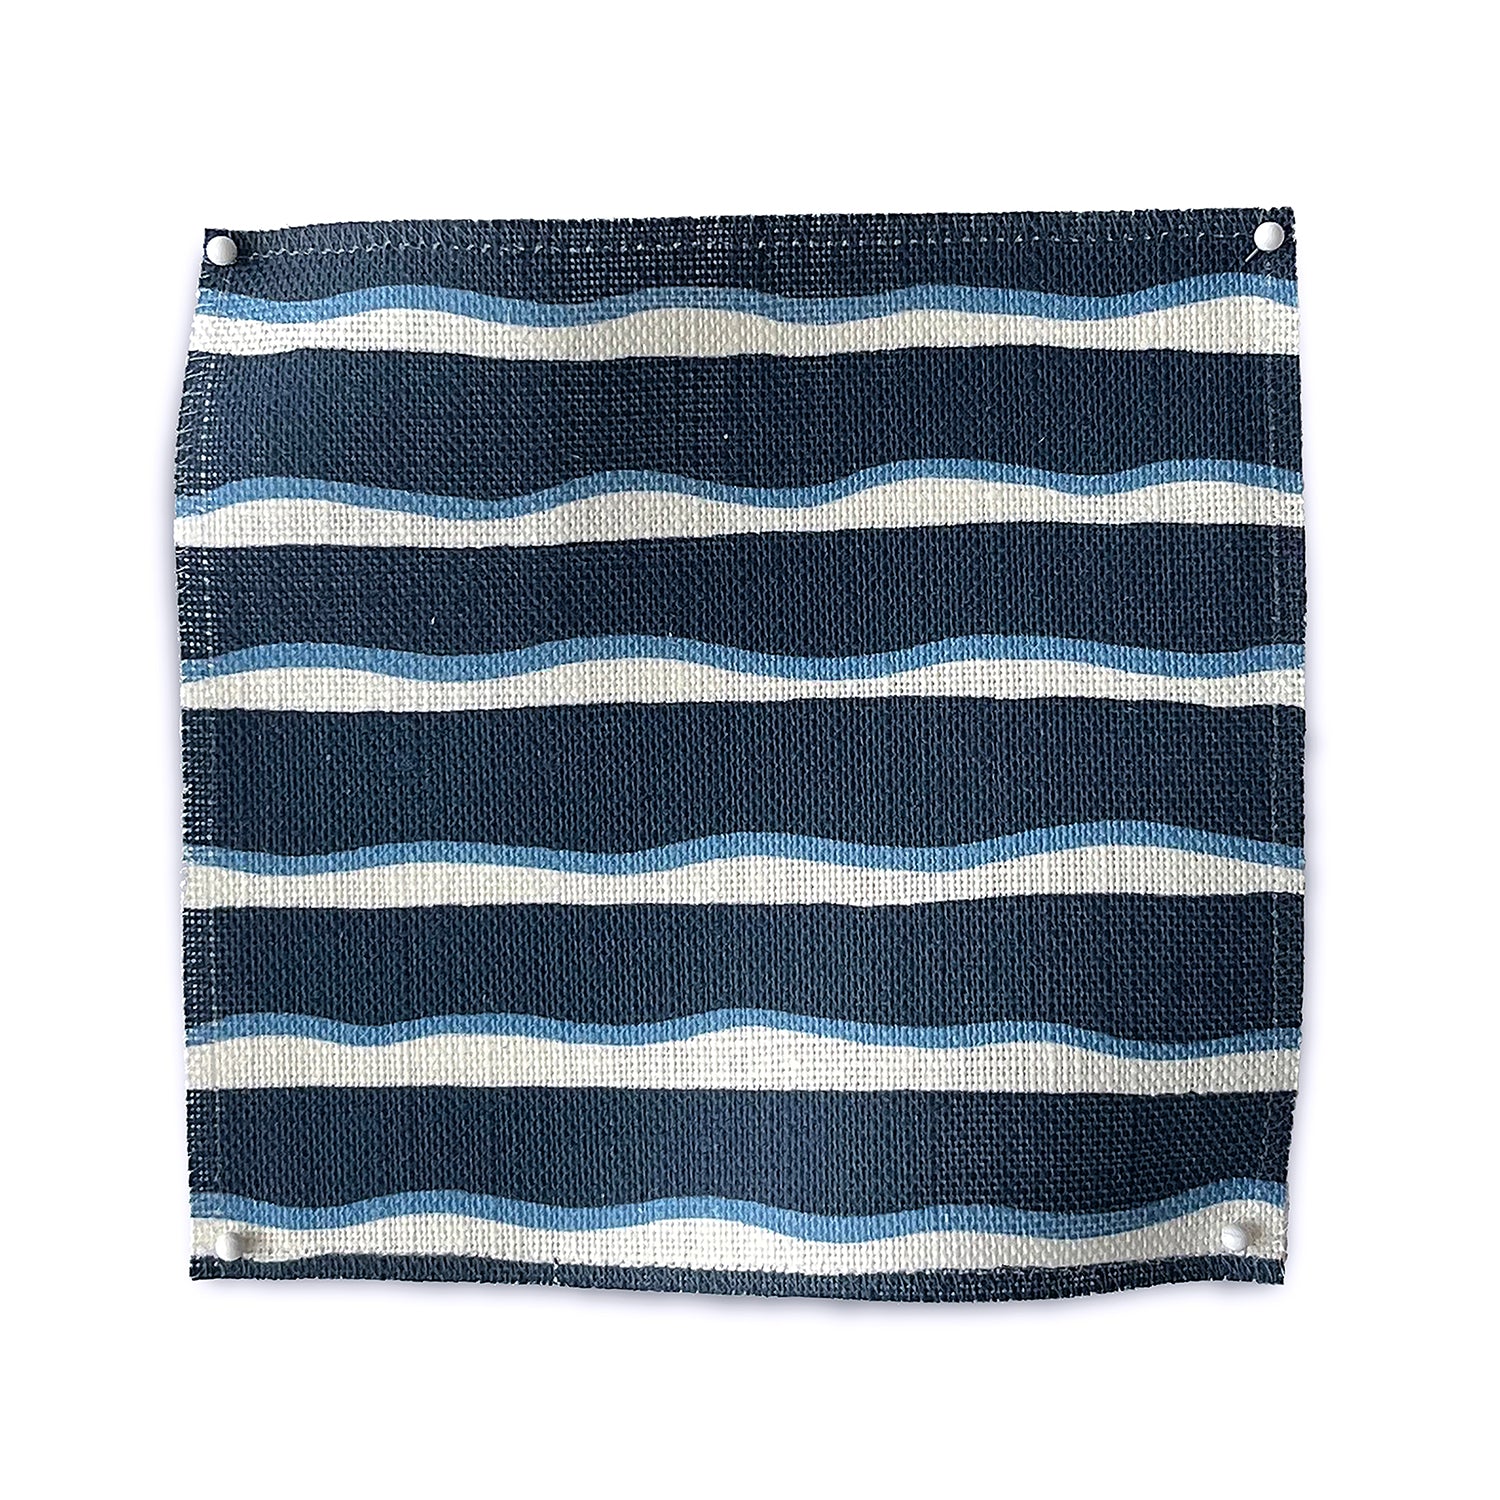 Square fabric swatch in an undulating stripe pattern in blue and white on a navy field.